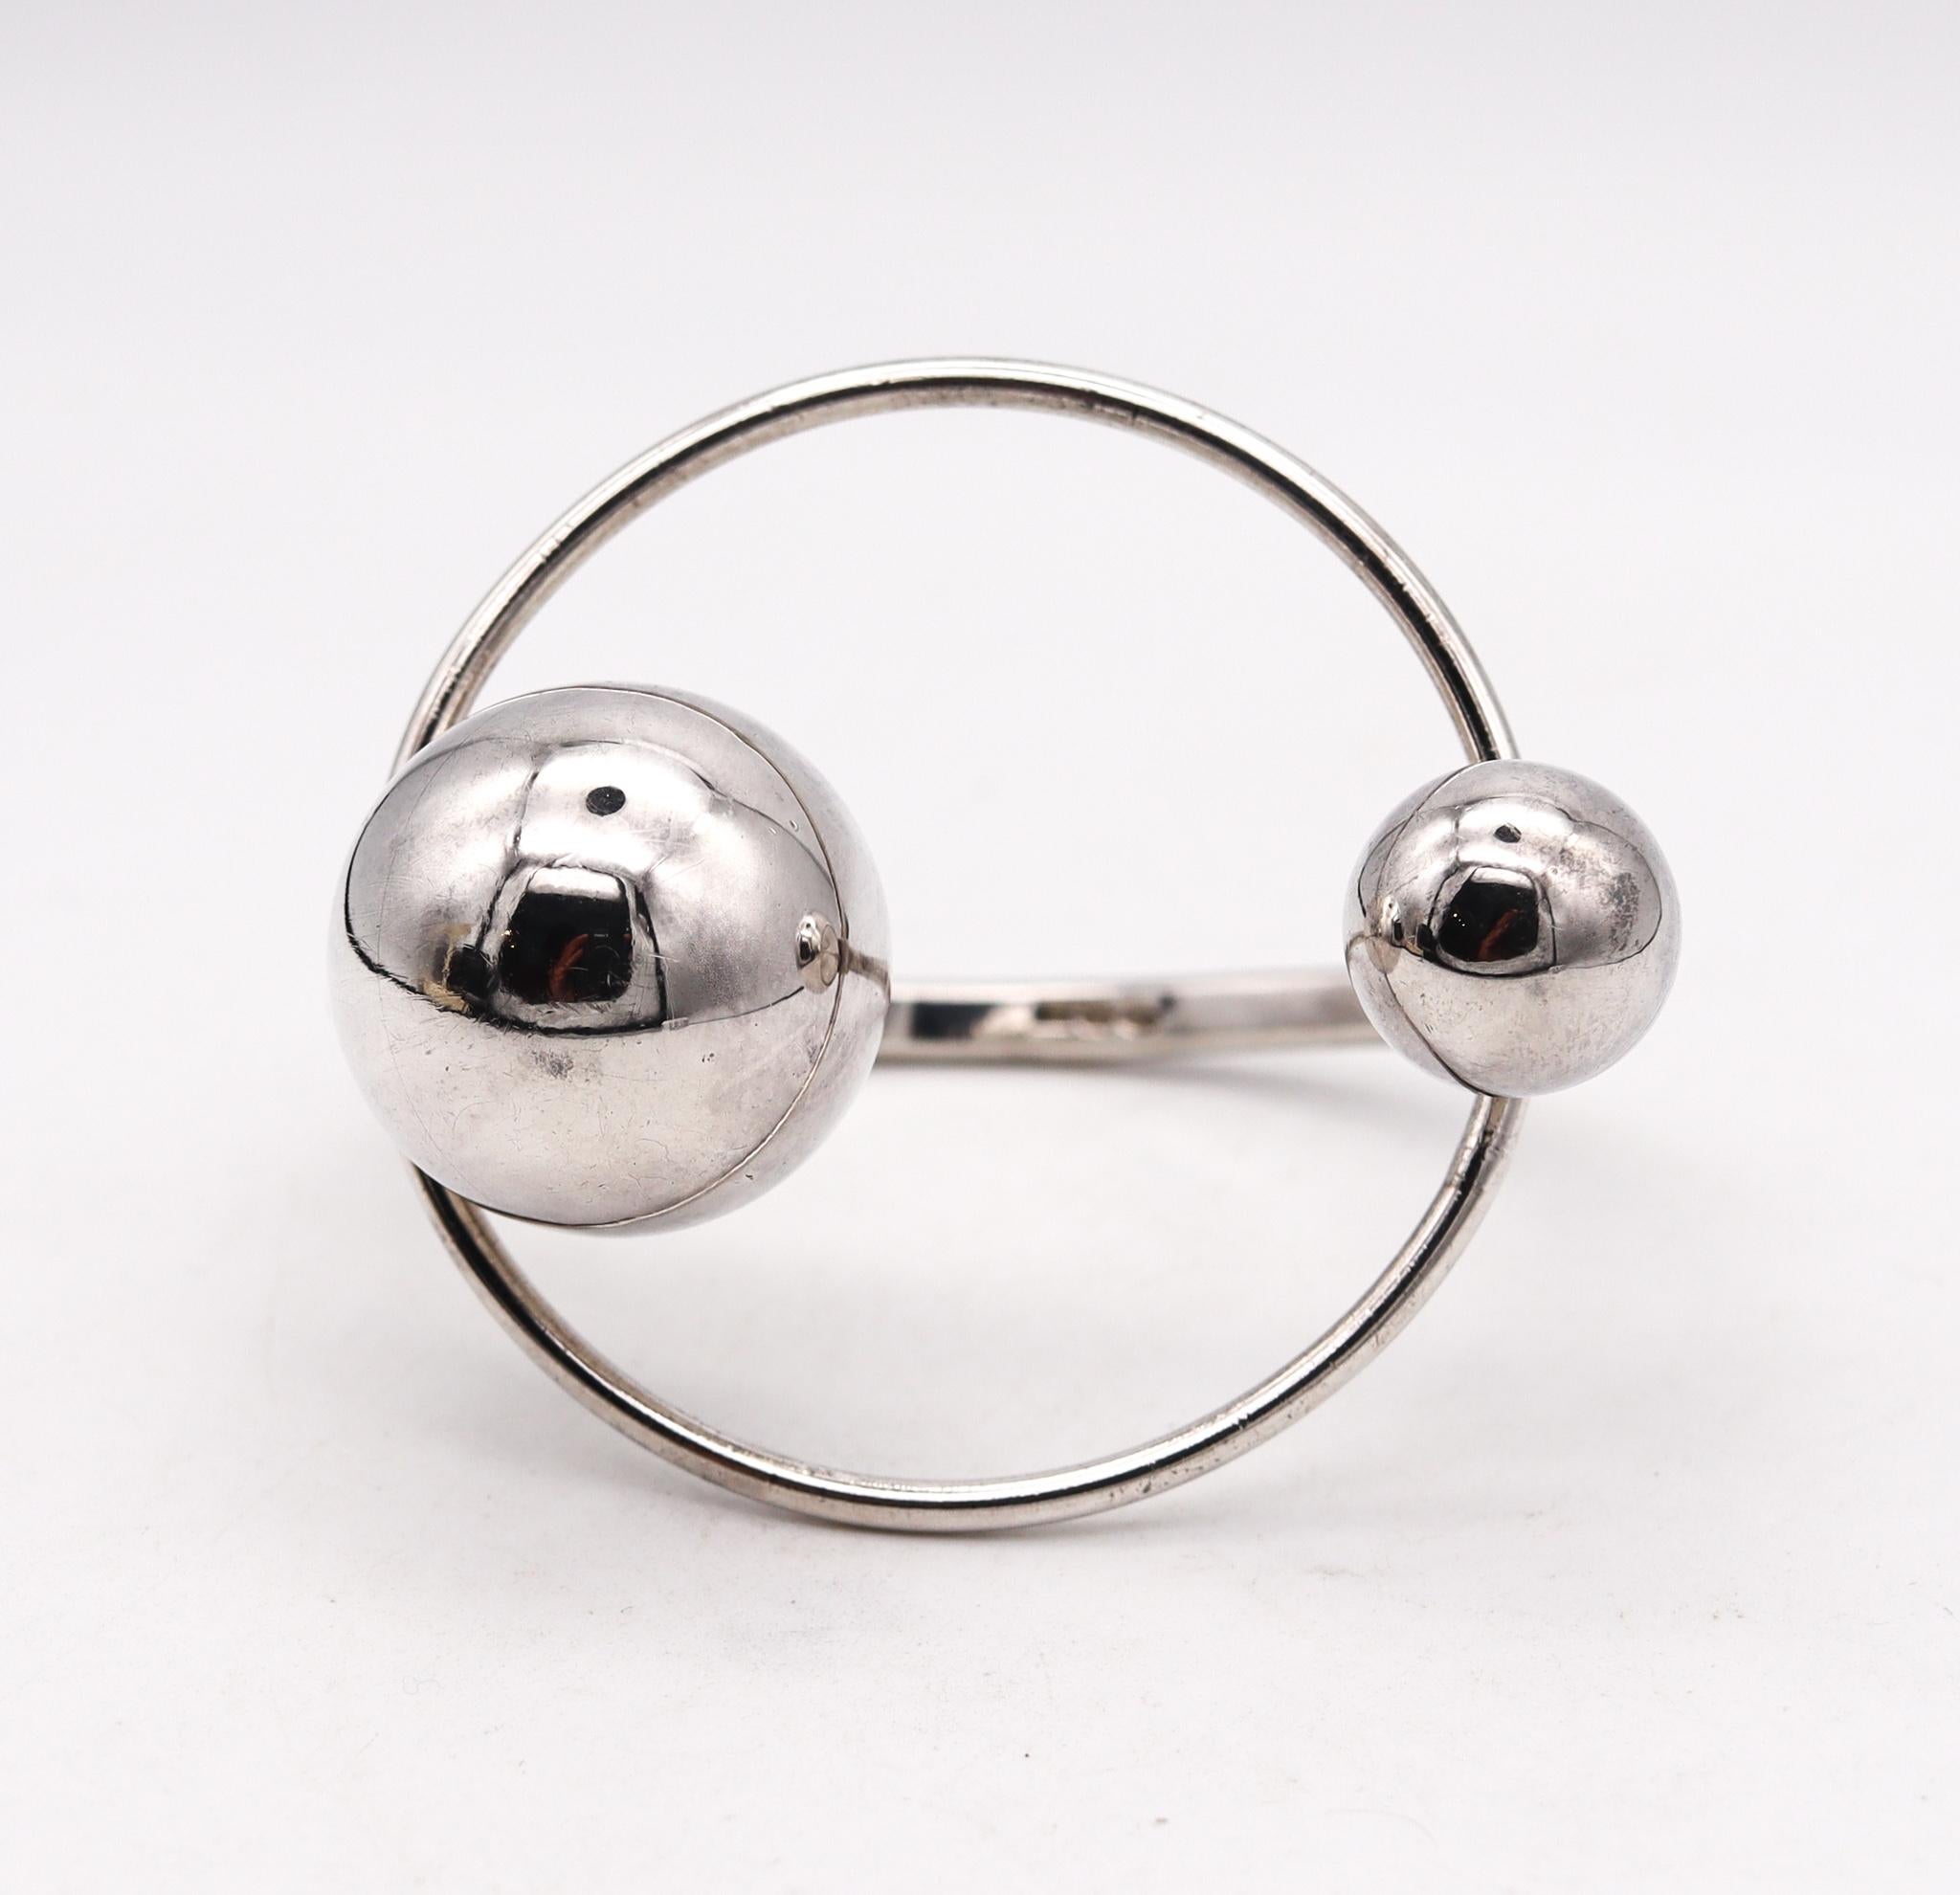 A Spatialism orbital bracelet designed by UnoAerre.

Beautiful ultra modern piece created in Milano Italy back in the early 1970. This Earth & Moon orbital bracelet bangle has been crafted with Spatialism patterns in solid .925/.999 sterling silver